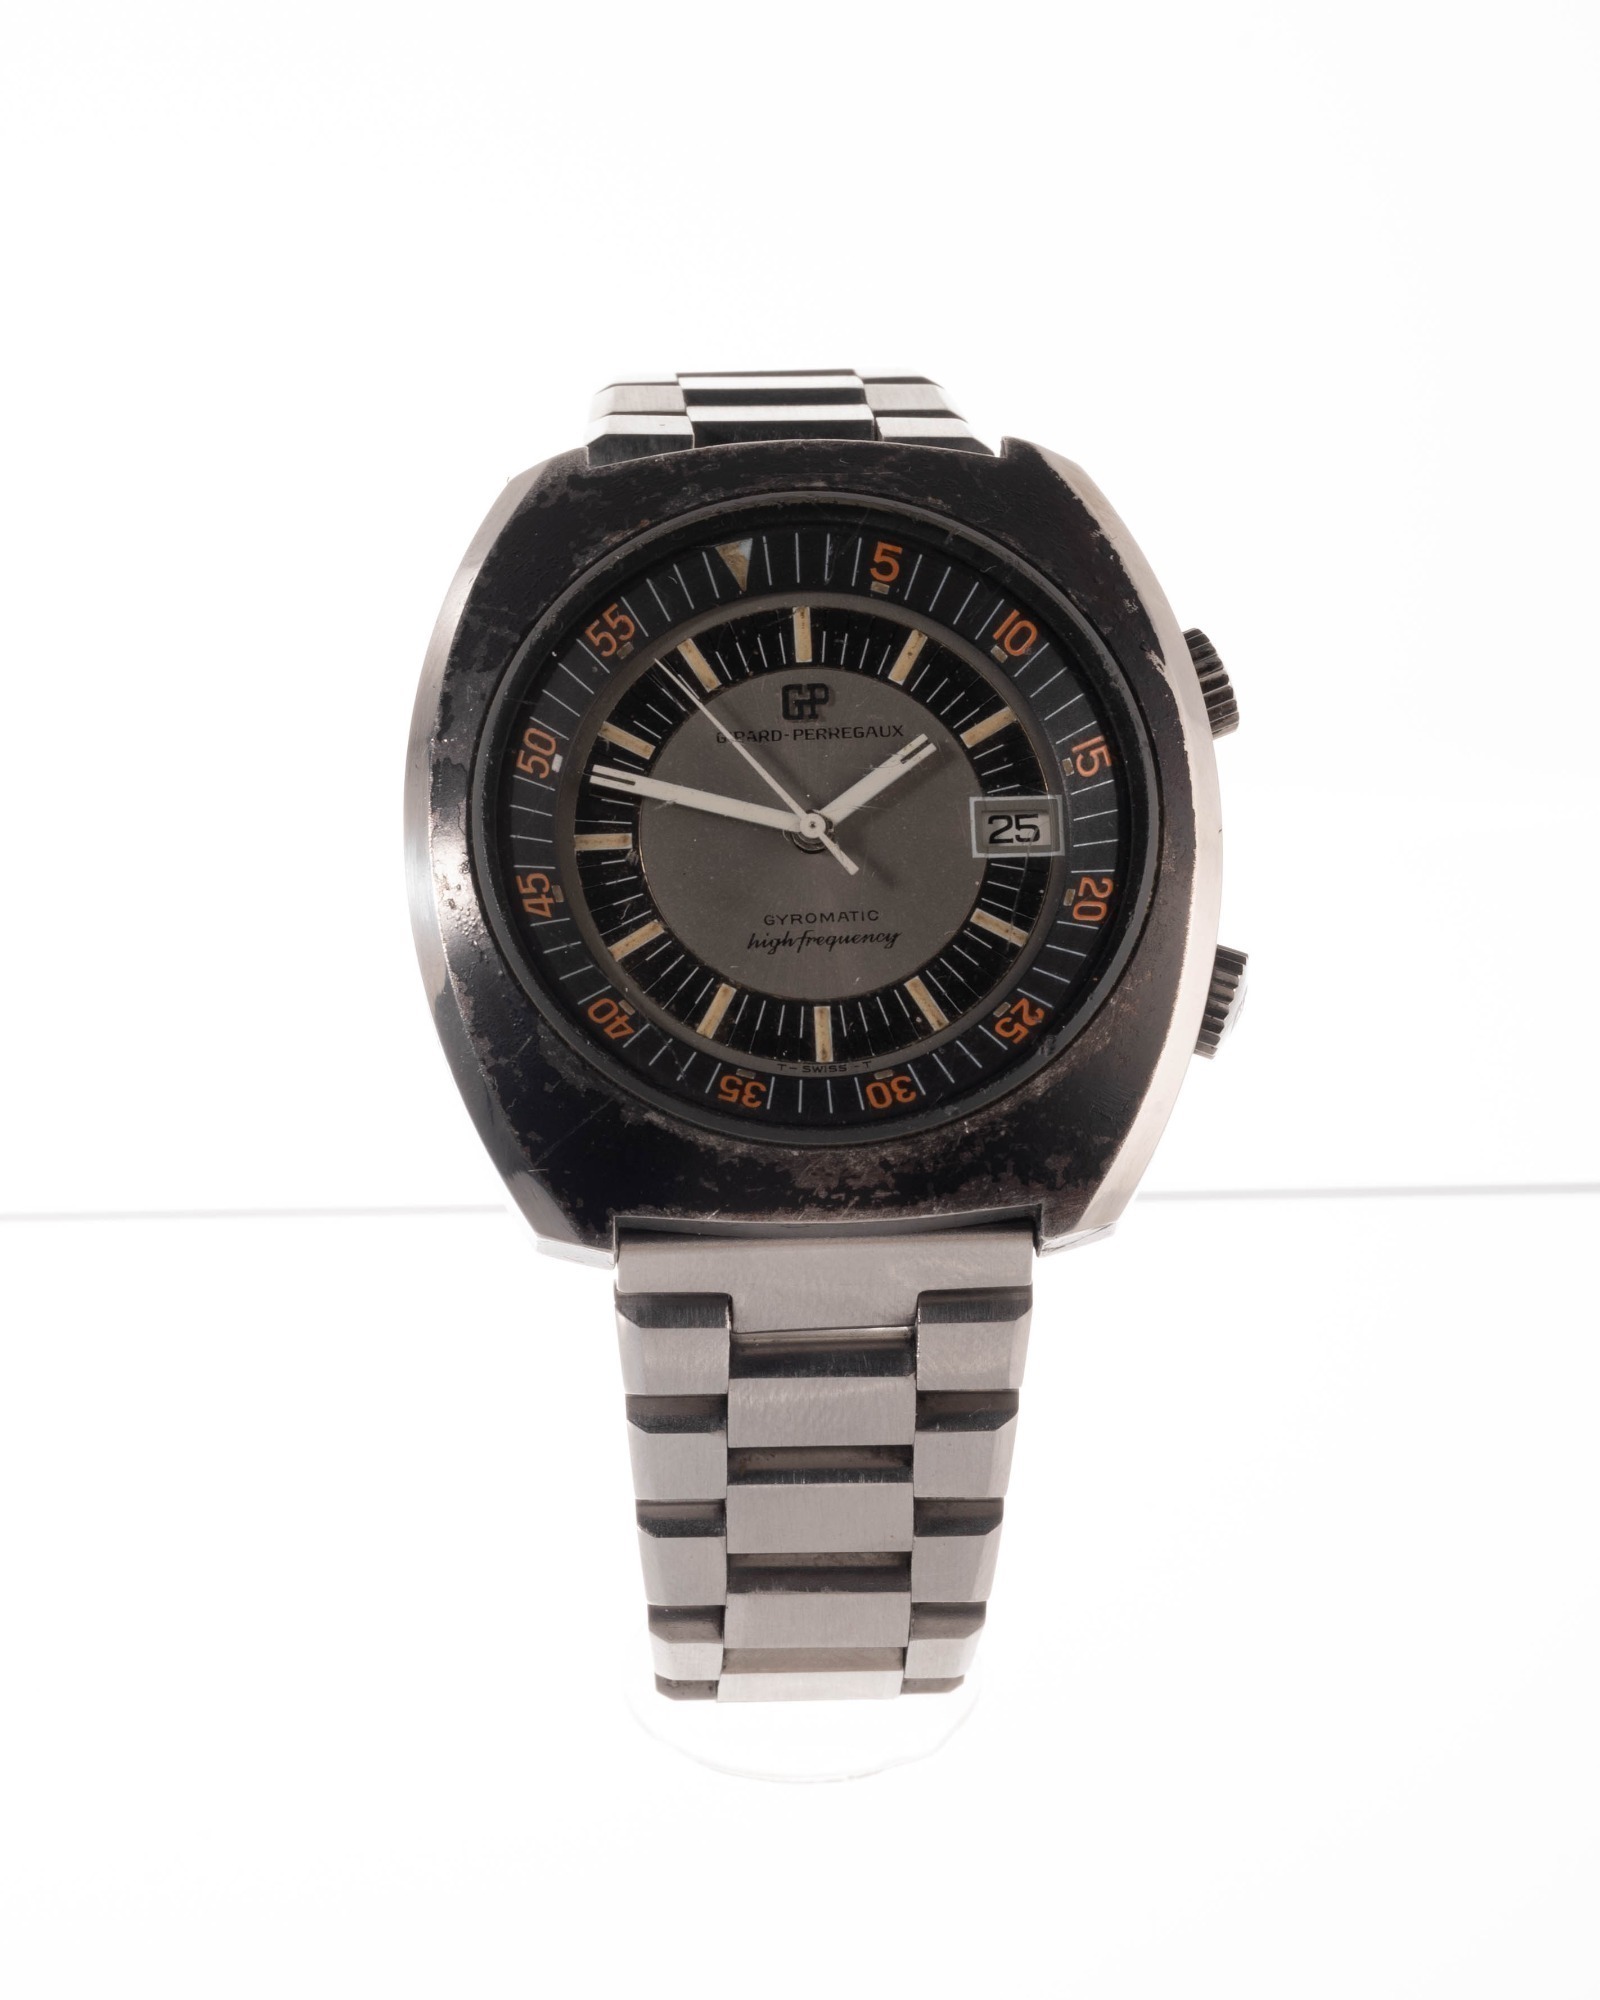 GIRARD PERREGAUX GYROMATIC HIGH FREQUENCY DIVER'S WATCH